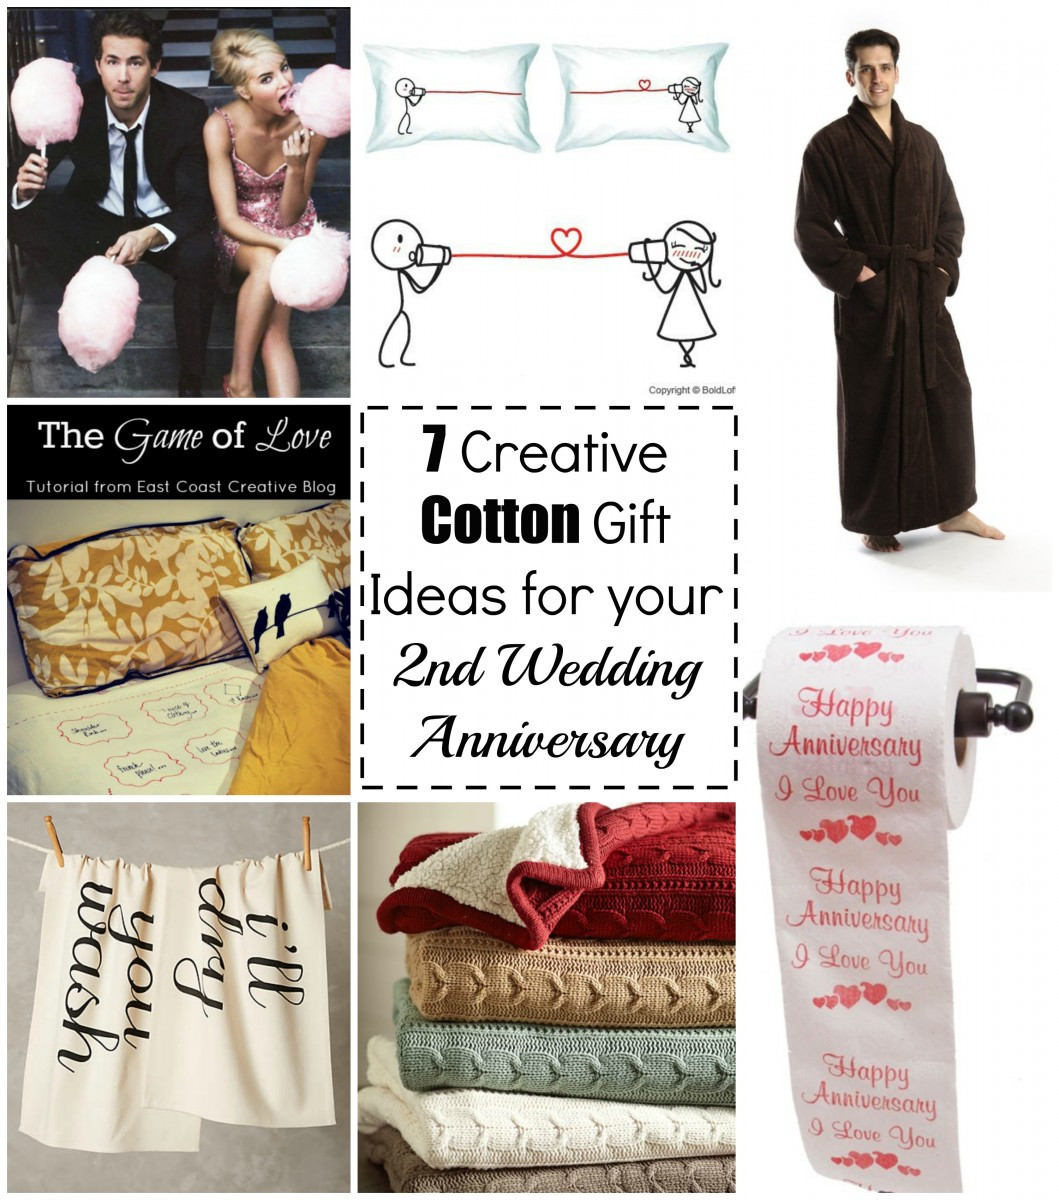 Second Year Anniversary Gift Ideas
 7 Cotton Gift Ideas for your 2nd Wedding Anniversary